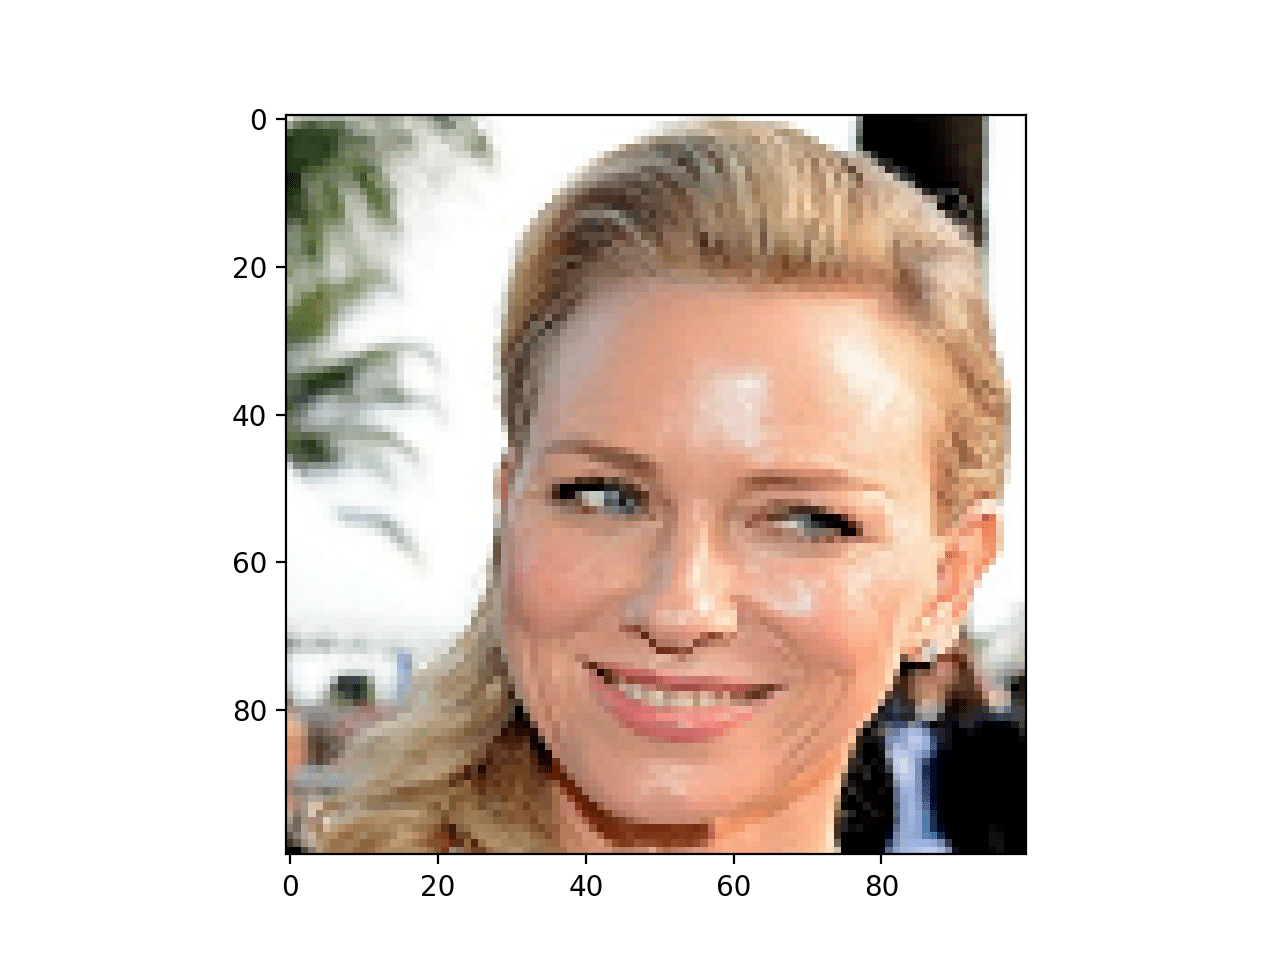 Naomi Watts Cannes (2014) Licensed under Creative Commons attributed to Georges Biard